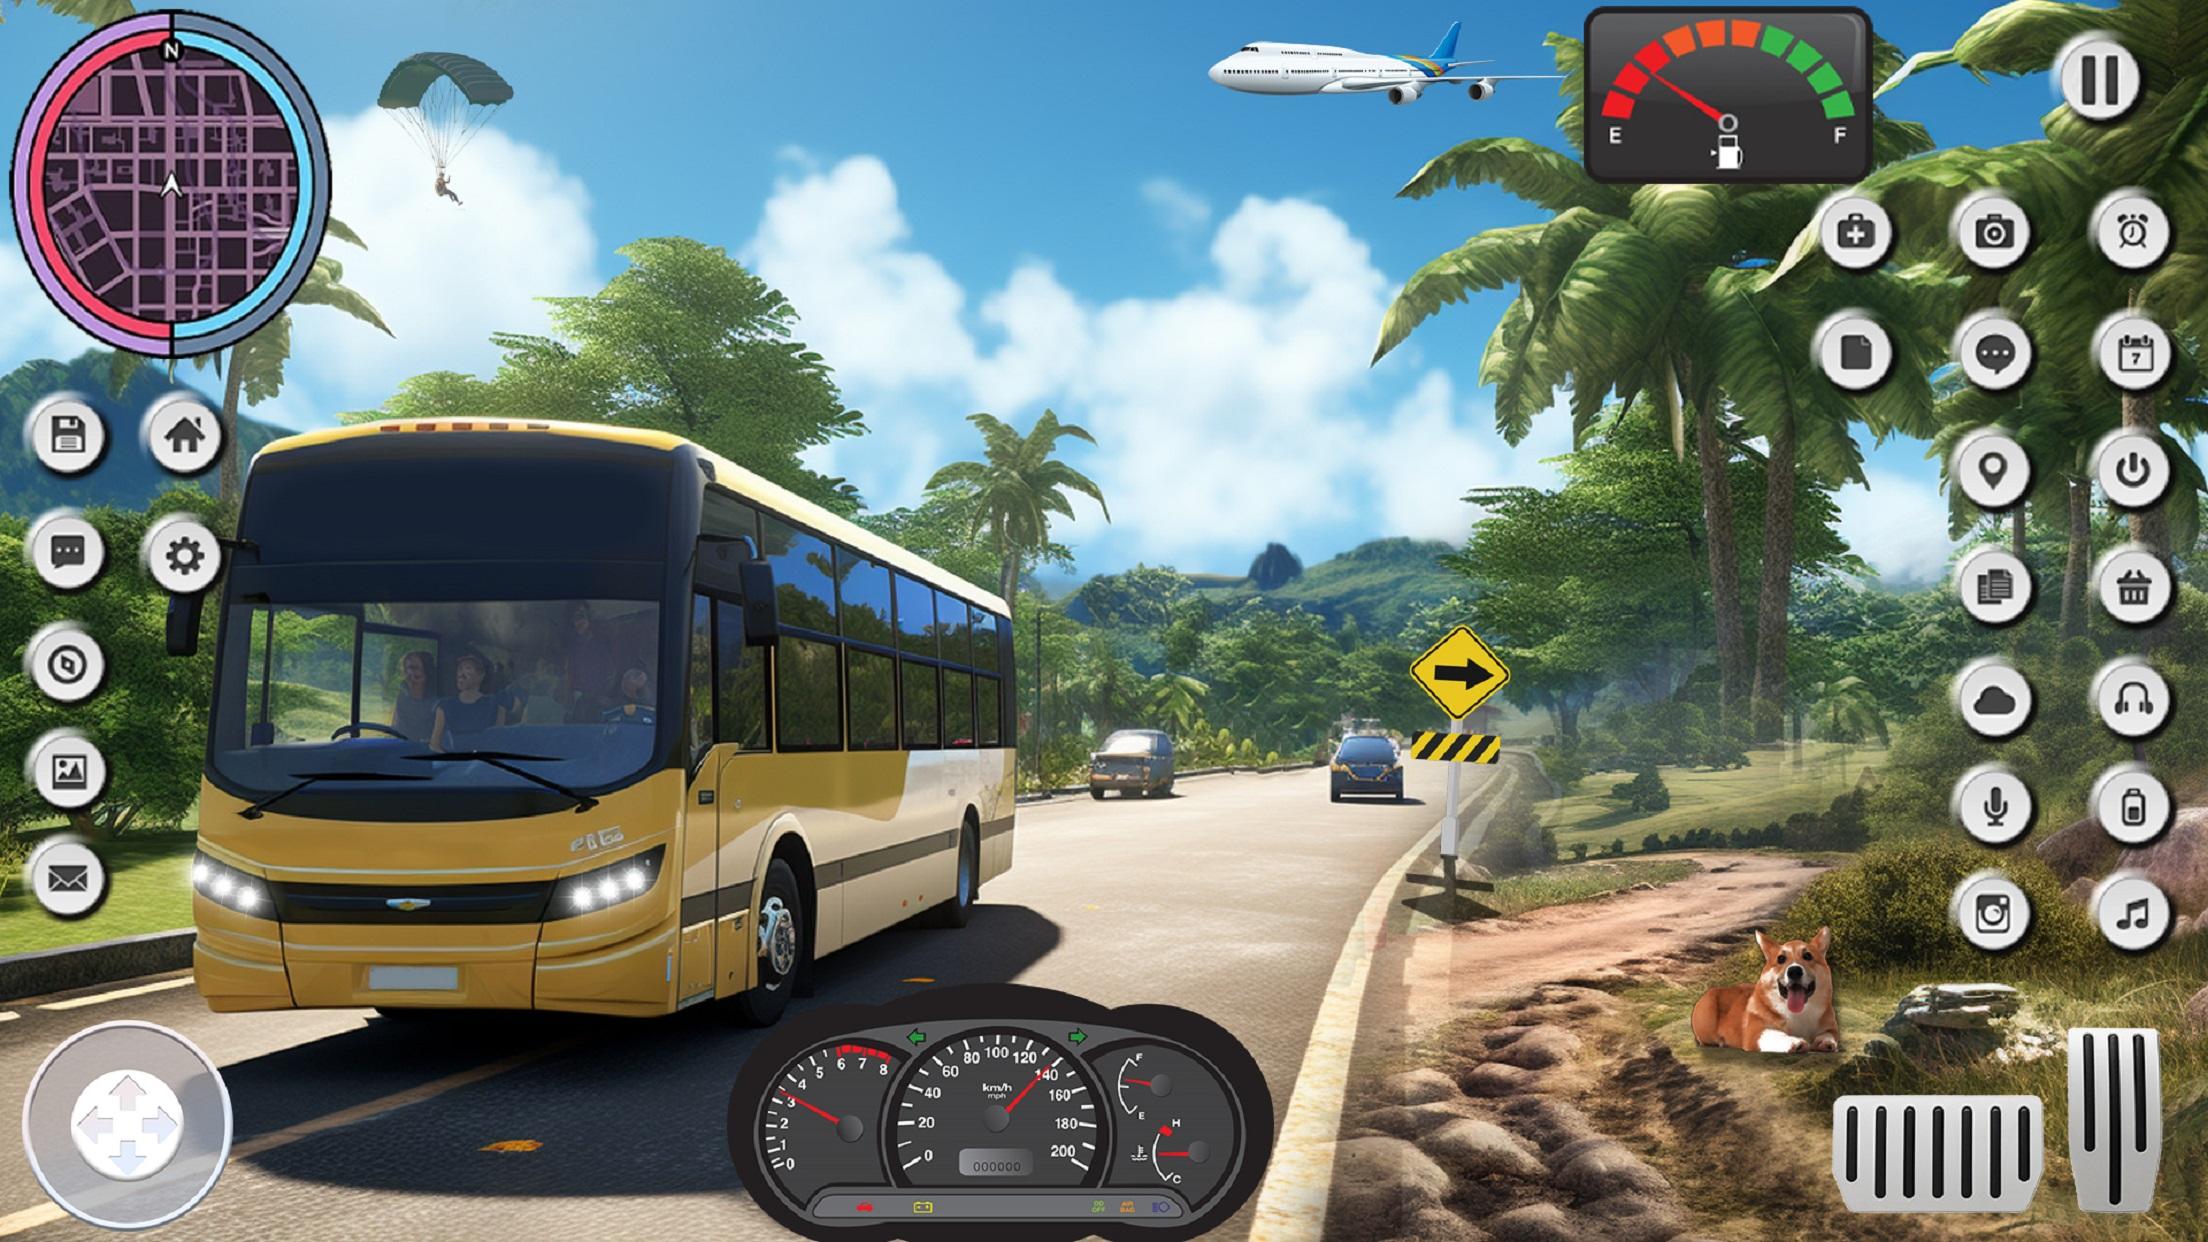 Bus Simulator Games: Bus Games Game for Android - Download